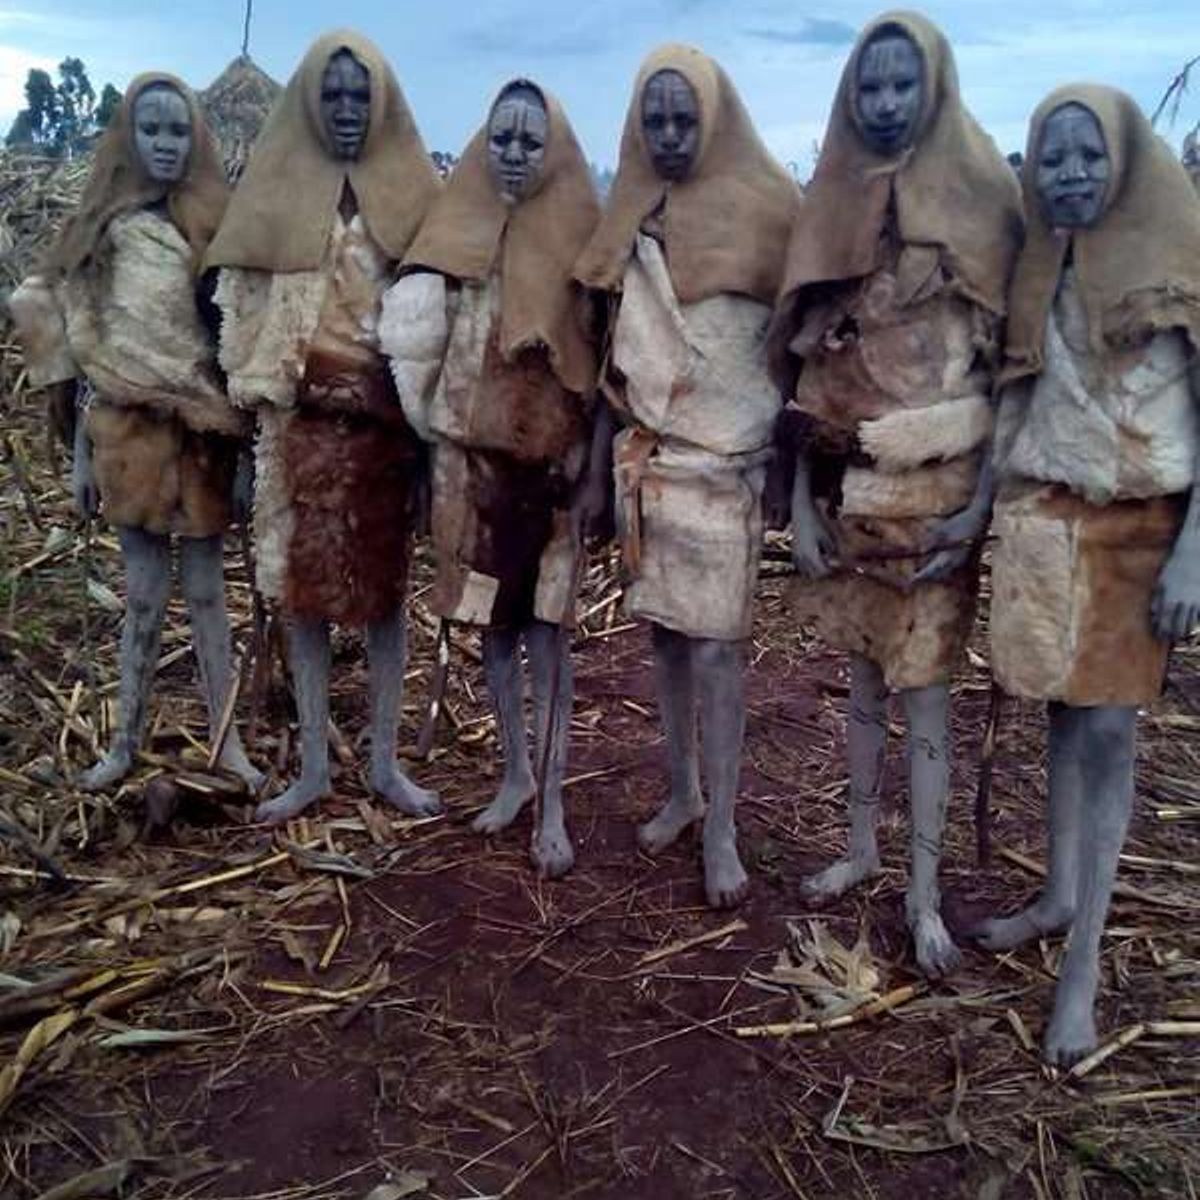 Striking Differences Between Traditional And Christian Kalenjin Circumcision Ceremony